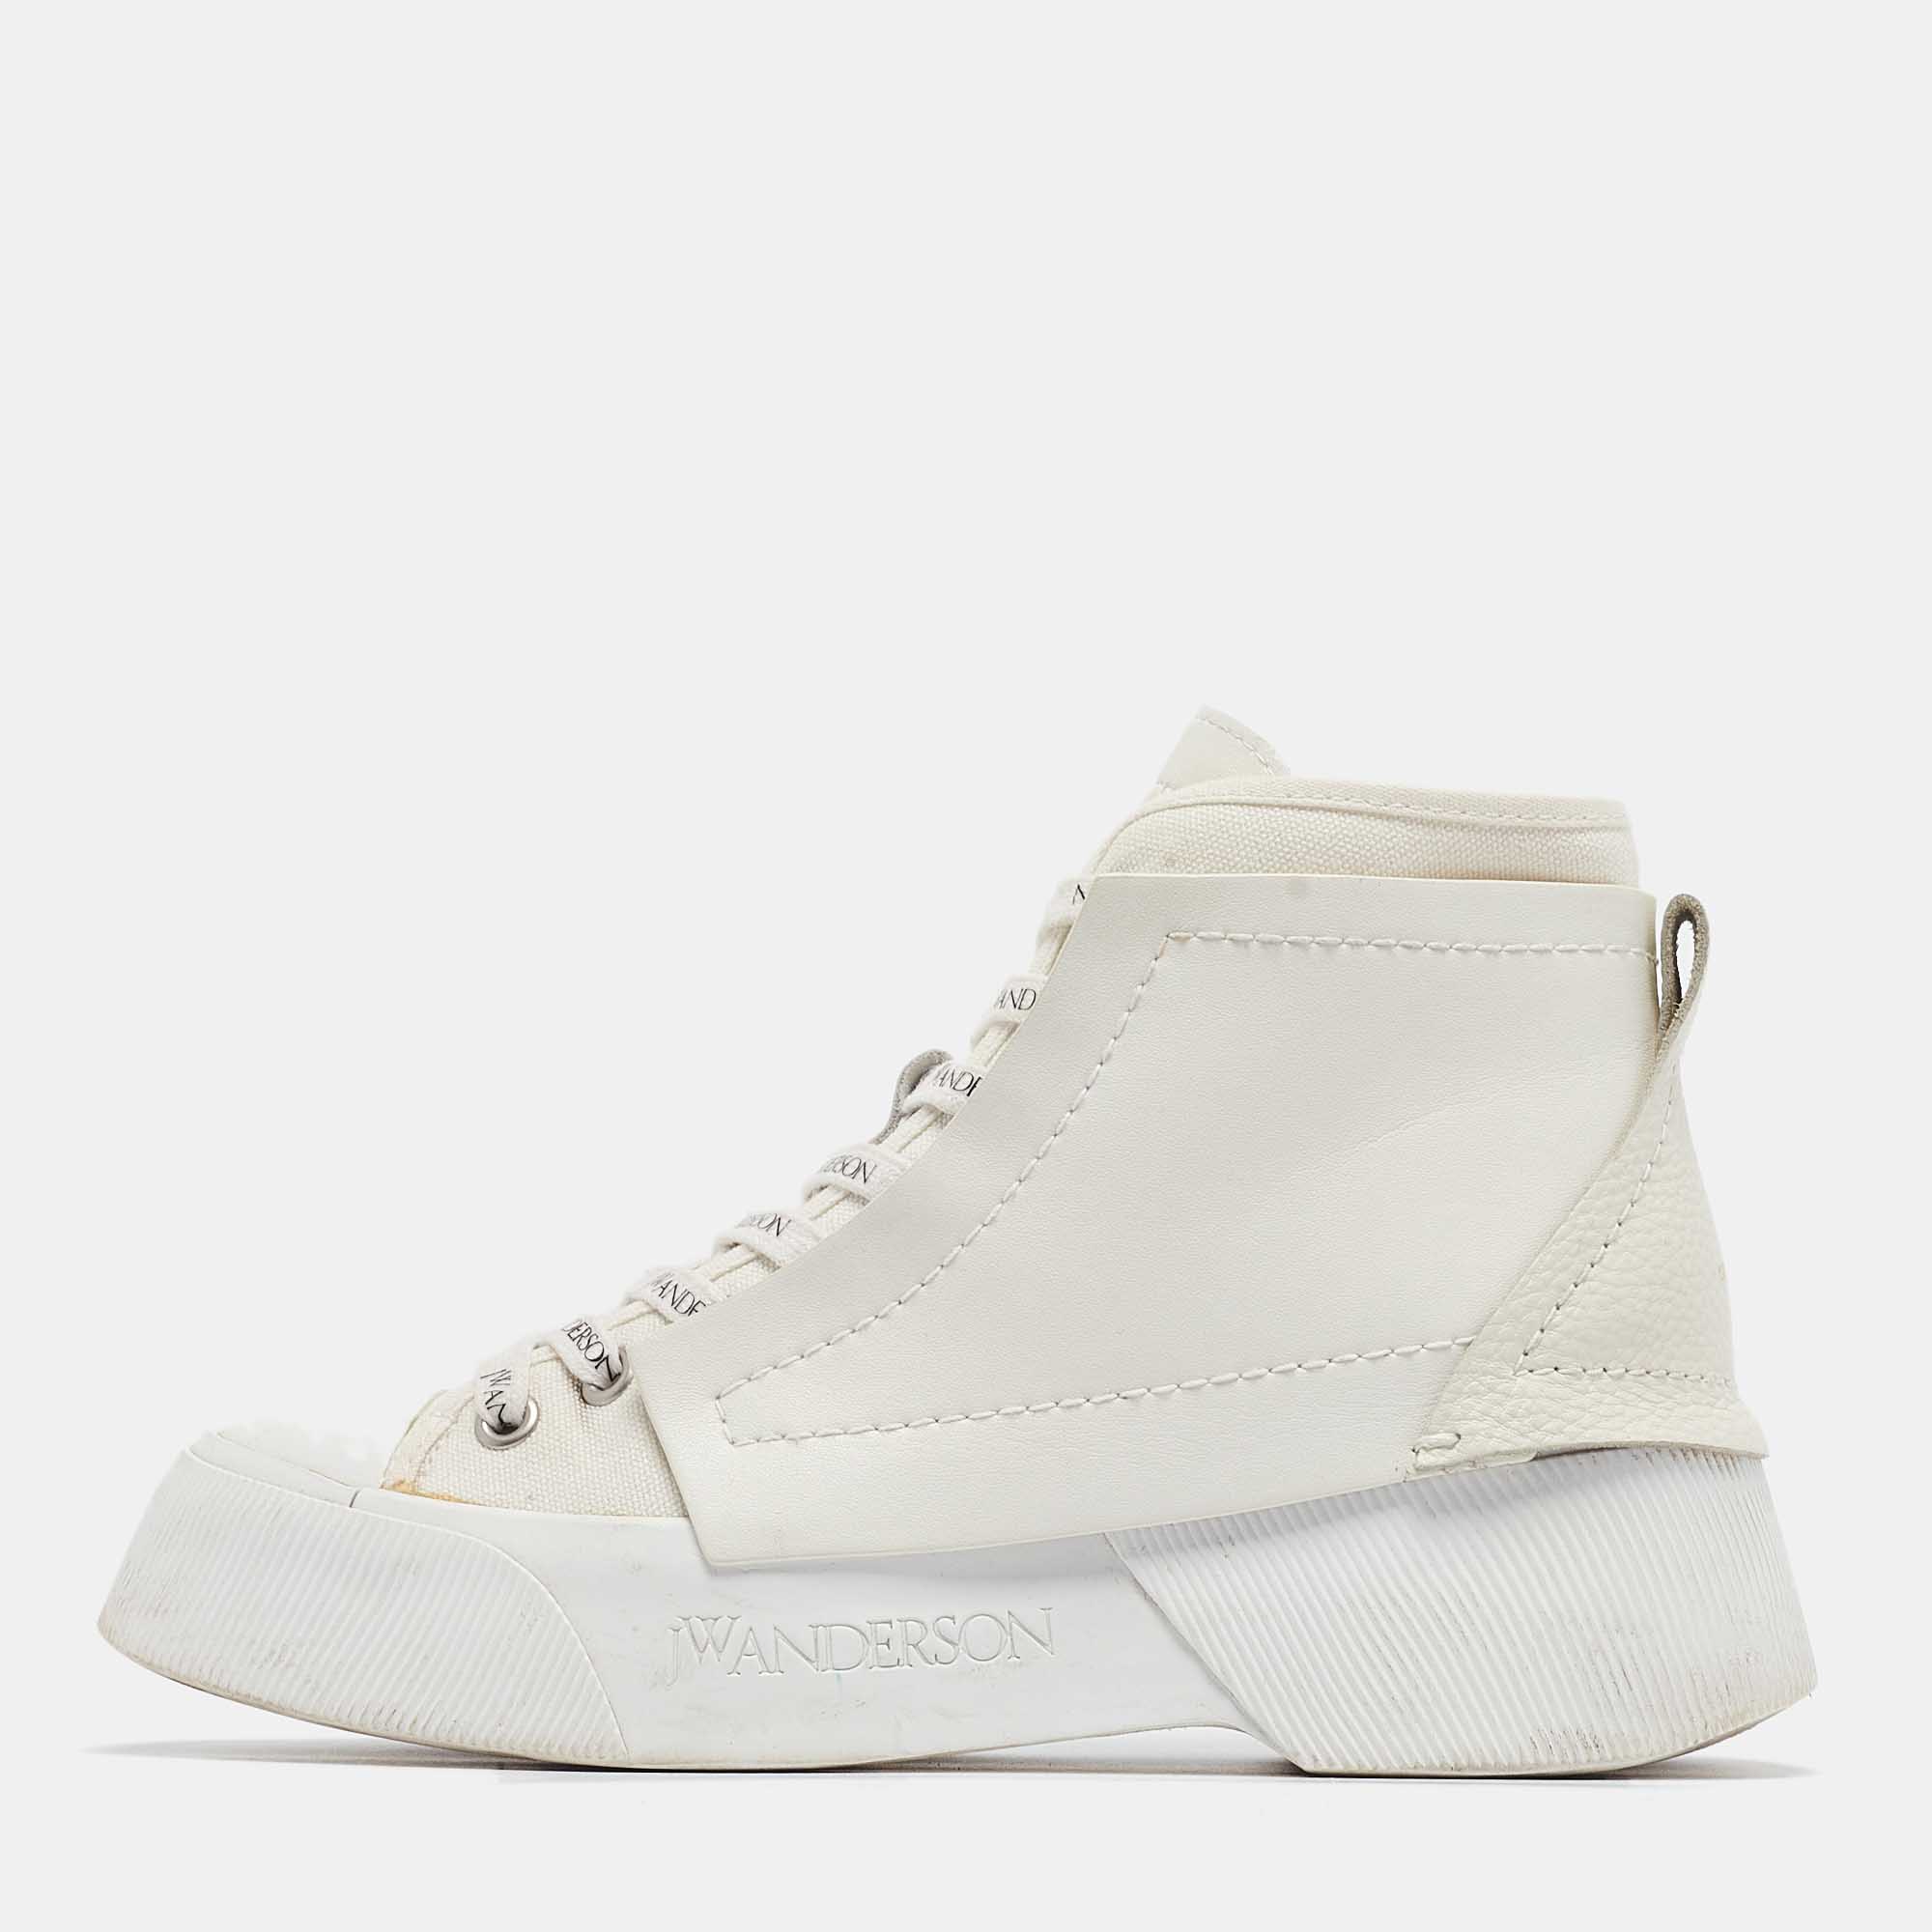 J.w.anderson j.w. anderson white canvas and leather high top sneakers size 37